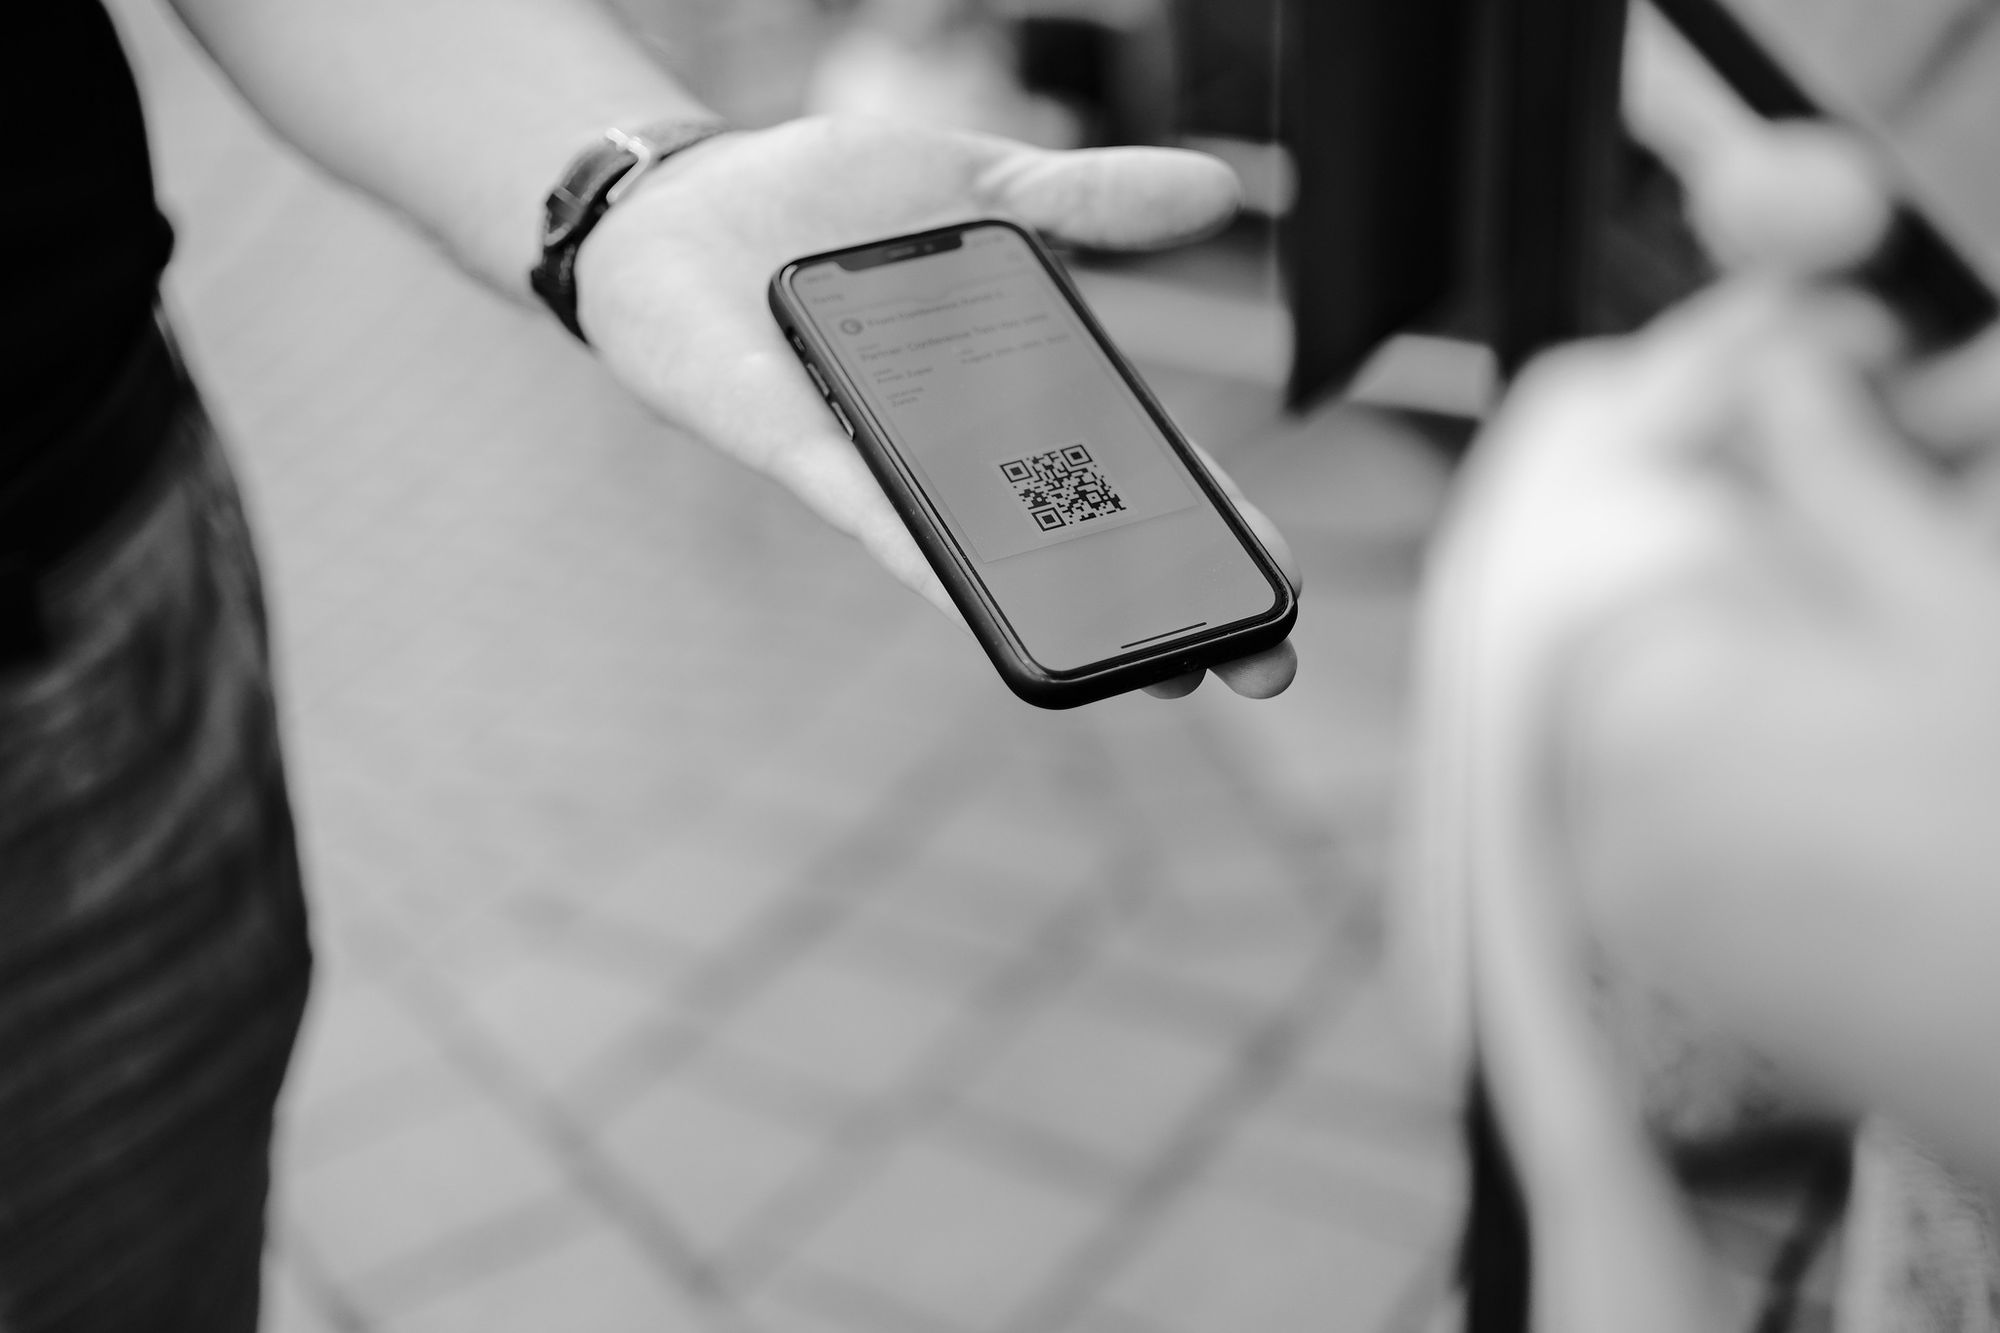 Black and white image of a person holding a phone with a QR code